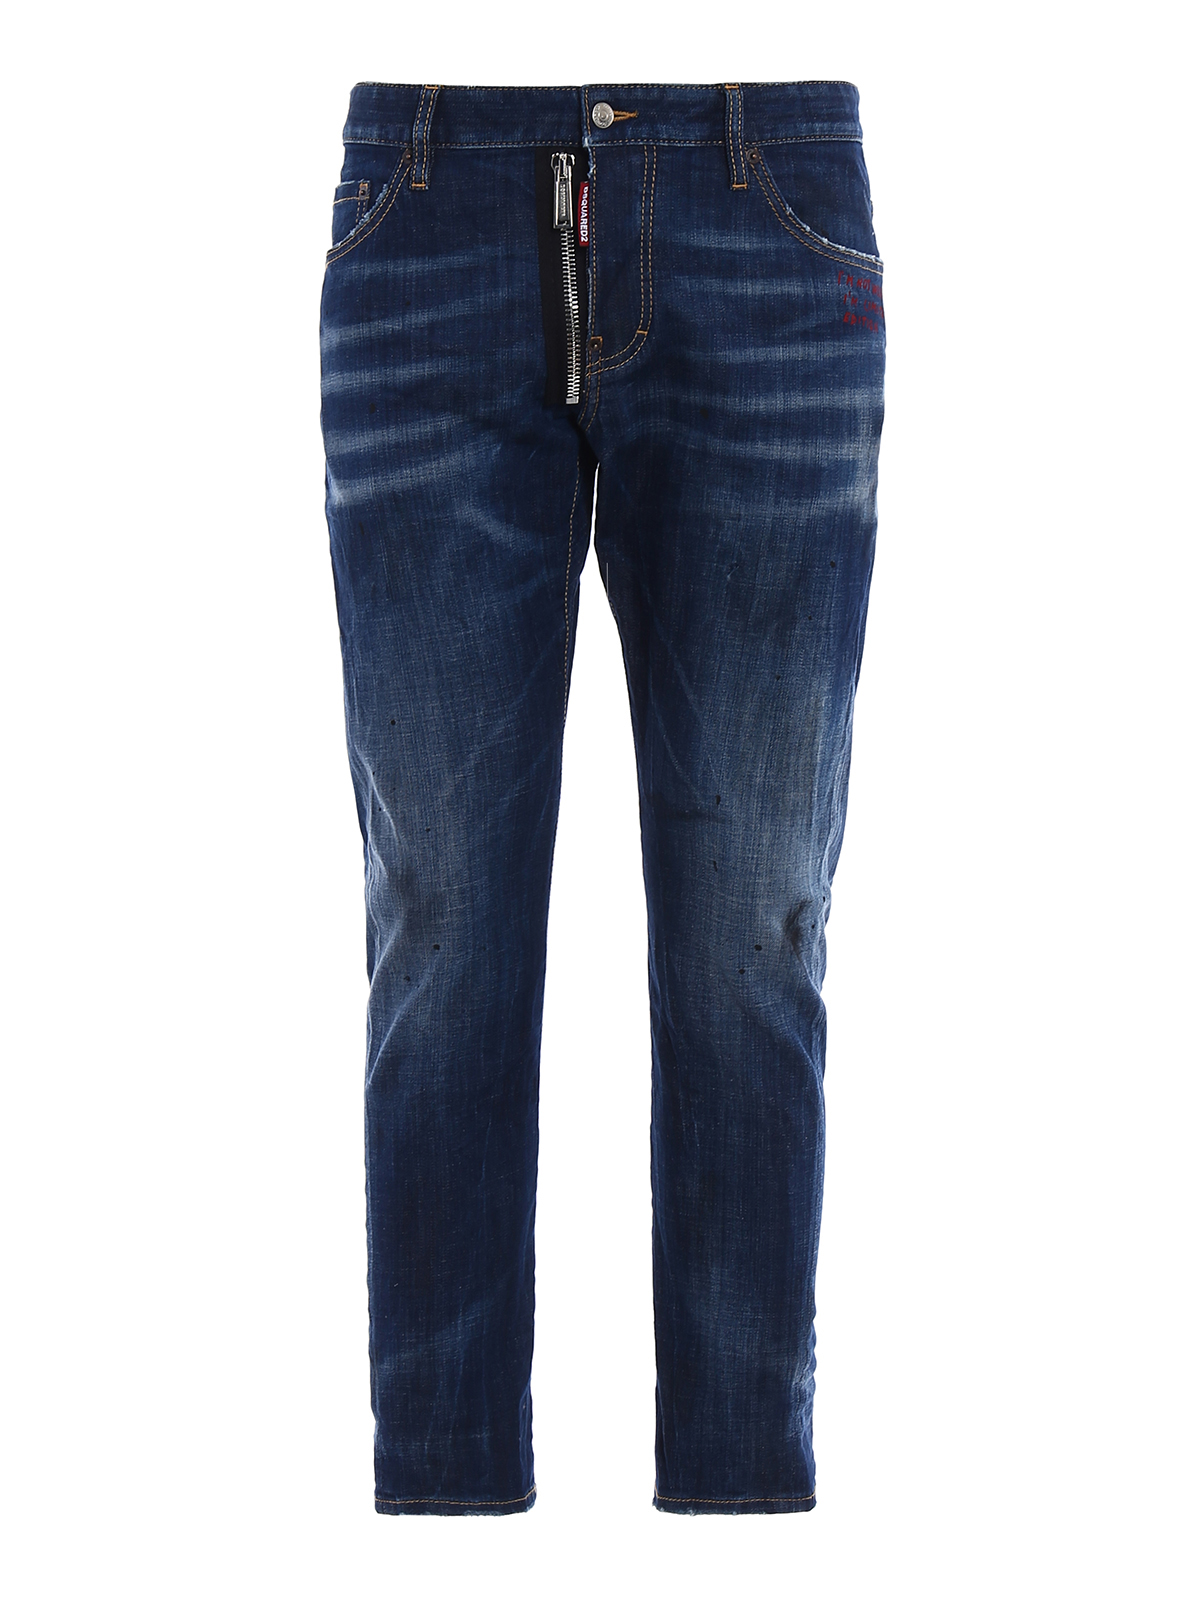 dsquared jeans limited edition